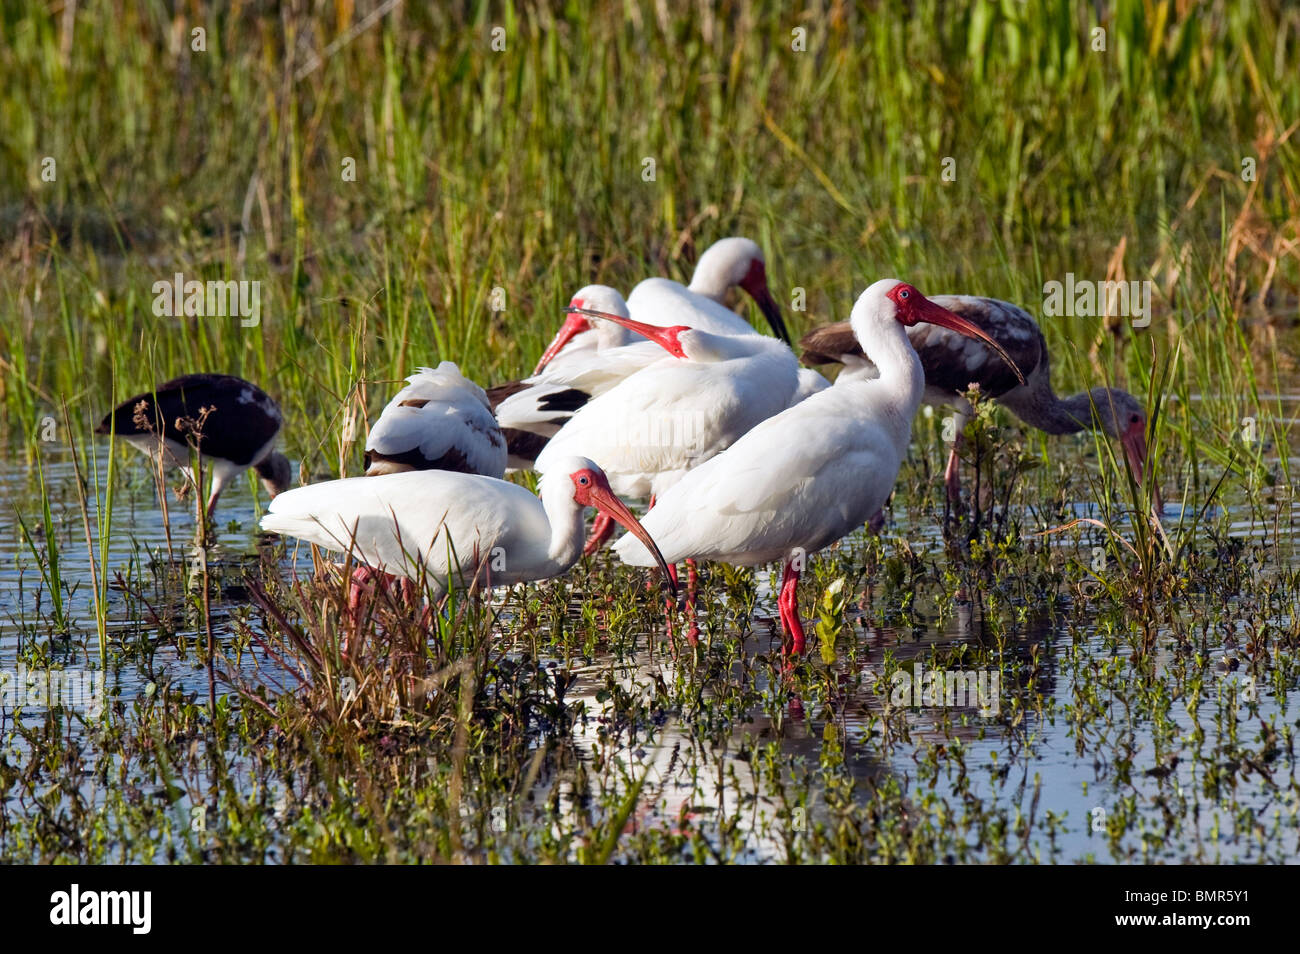 American White Ibis (Eudocimus albus) photographed in Grassy Waters Reserve, a wetland near West Palm Beach, FL. Stock Photo